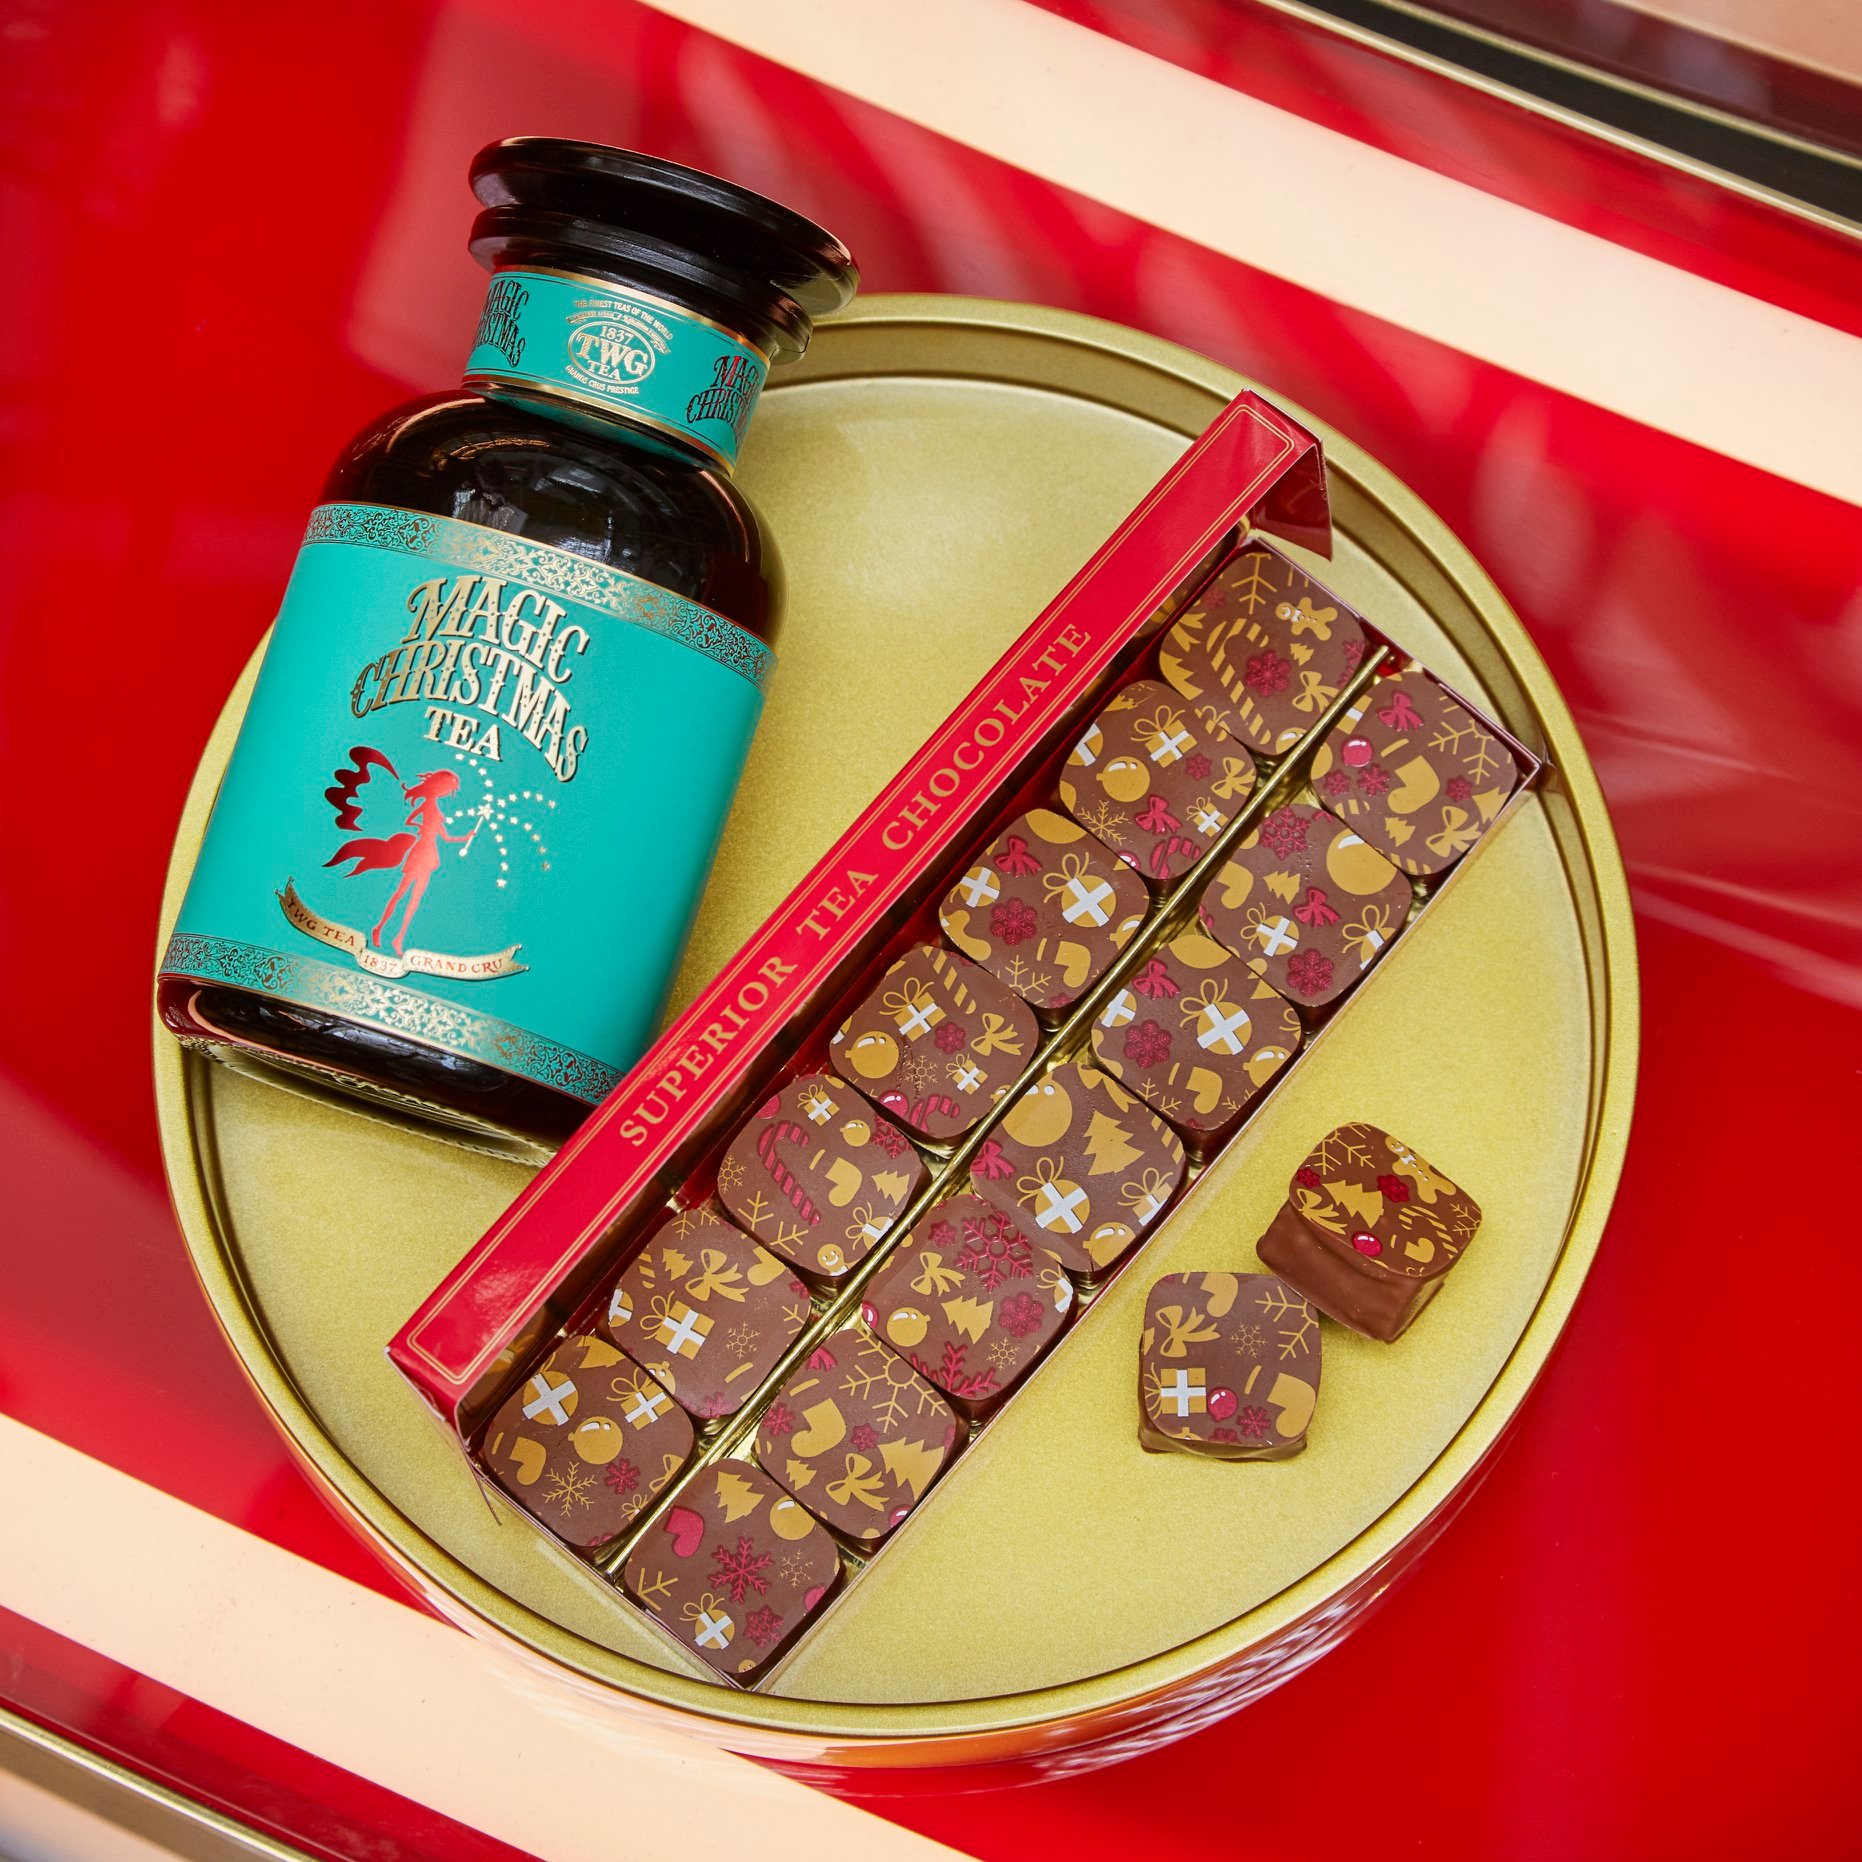 A pure indulgence for the most discerning gourmands, the limited-edition milk chocolate bonbons are filled with Magic Christmas Tea infused ganache and finished with a festive motif. The Chocolate Bonbons are available in a box of 14 at TWG Tea Salons in Singapore. 